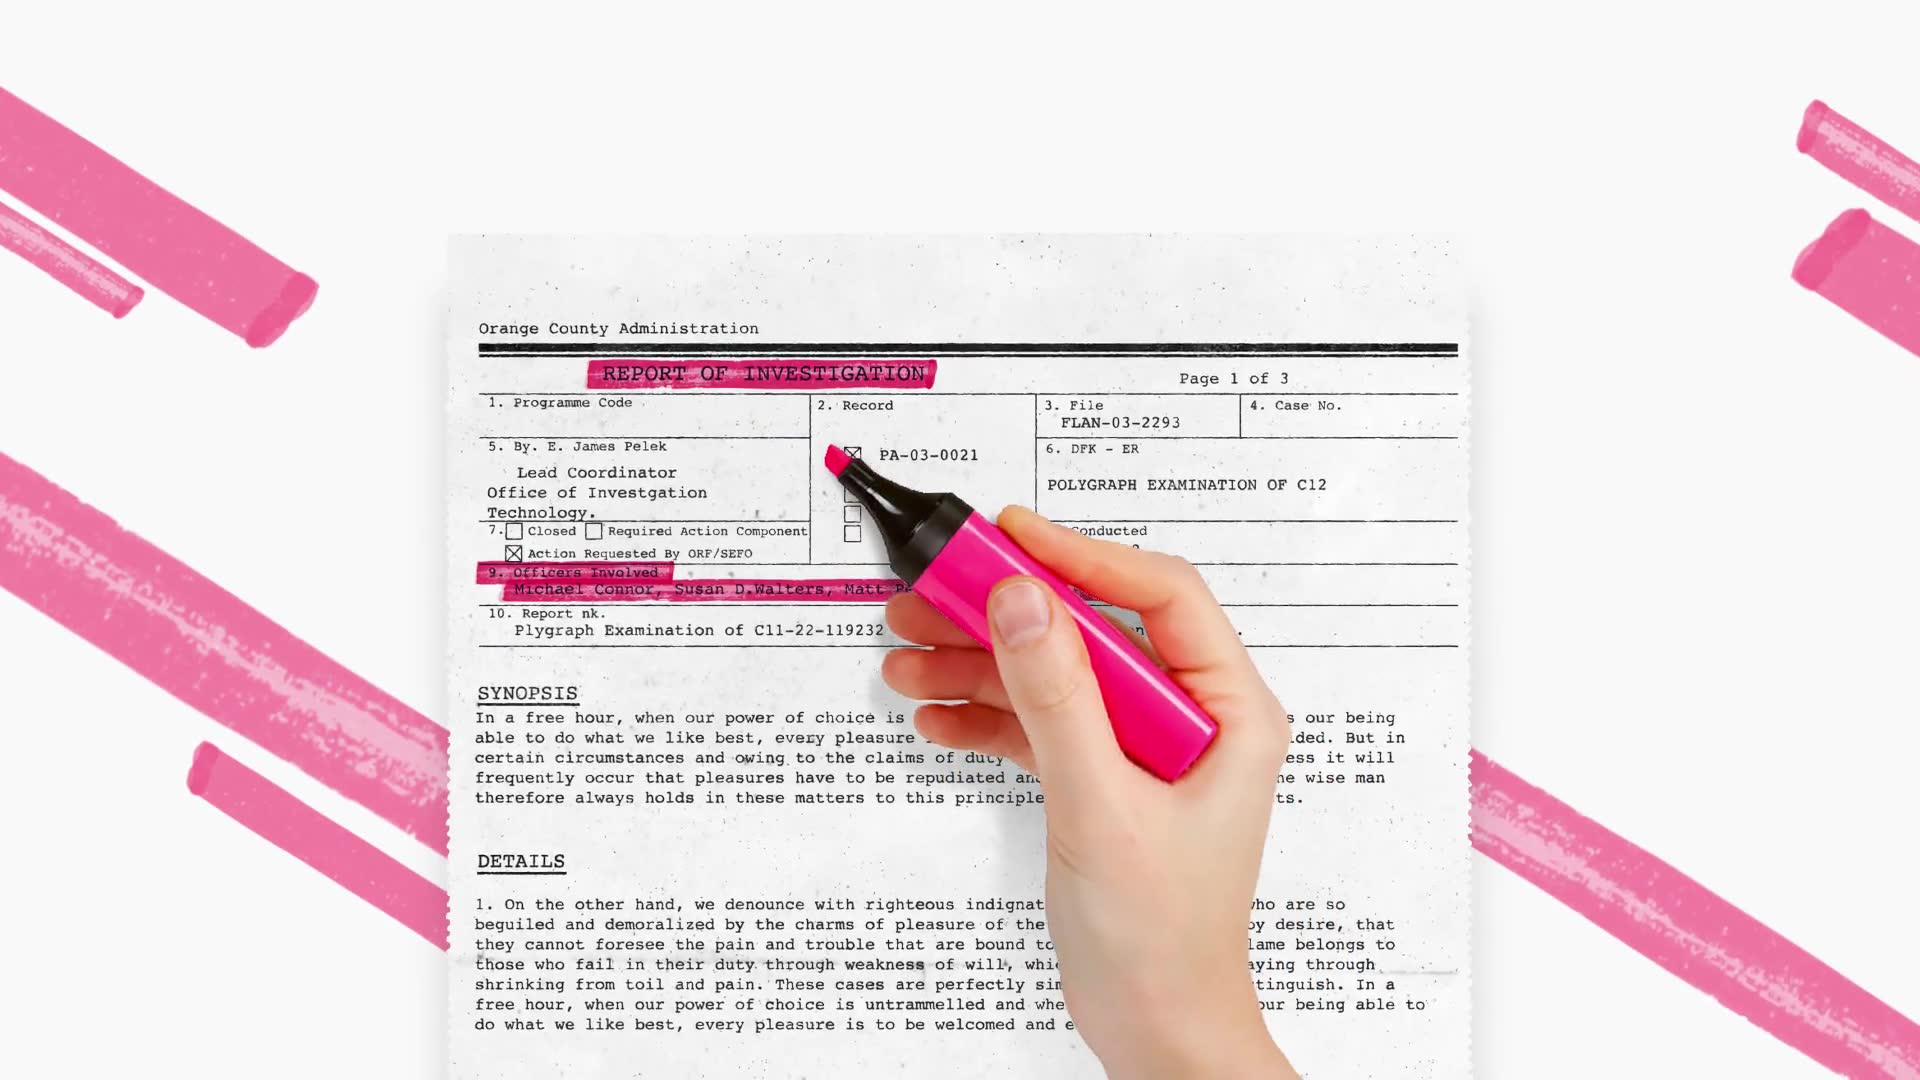 Document Highlighter - Download Videohive 22144983